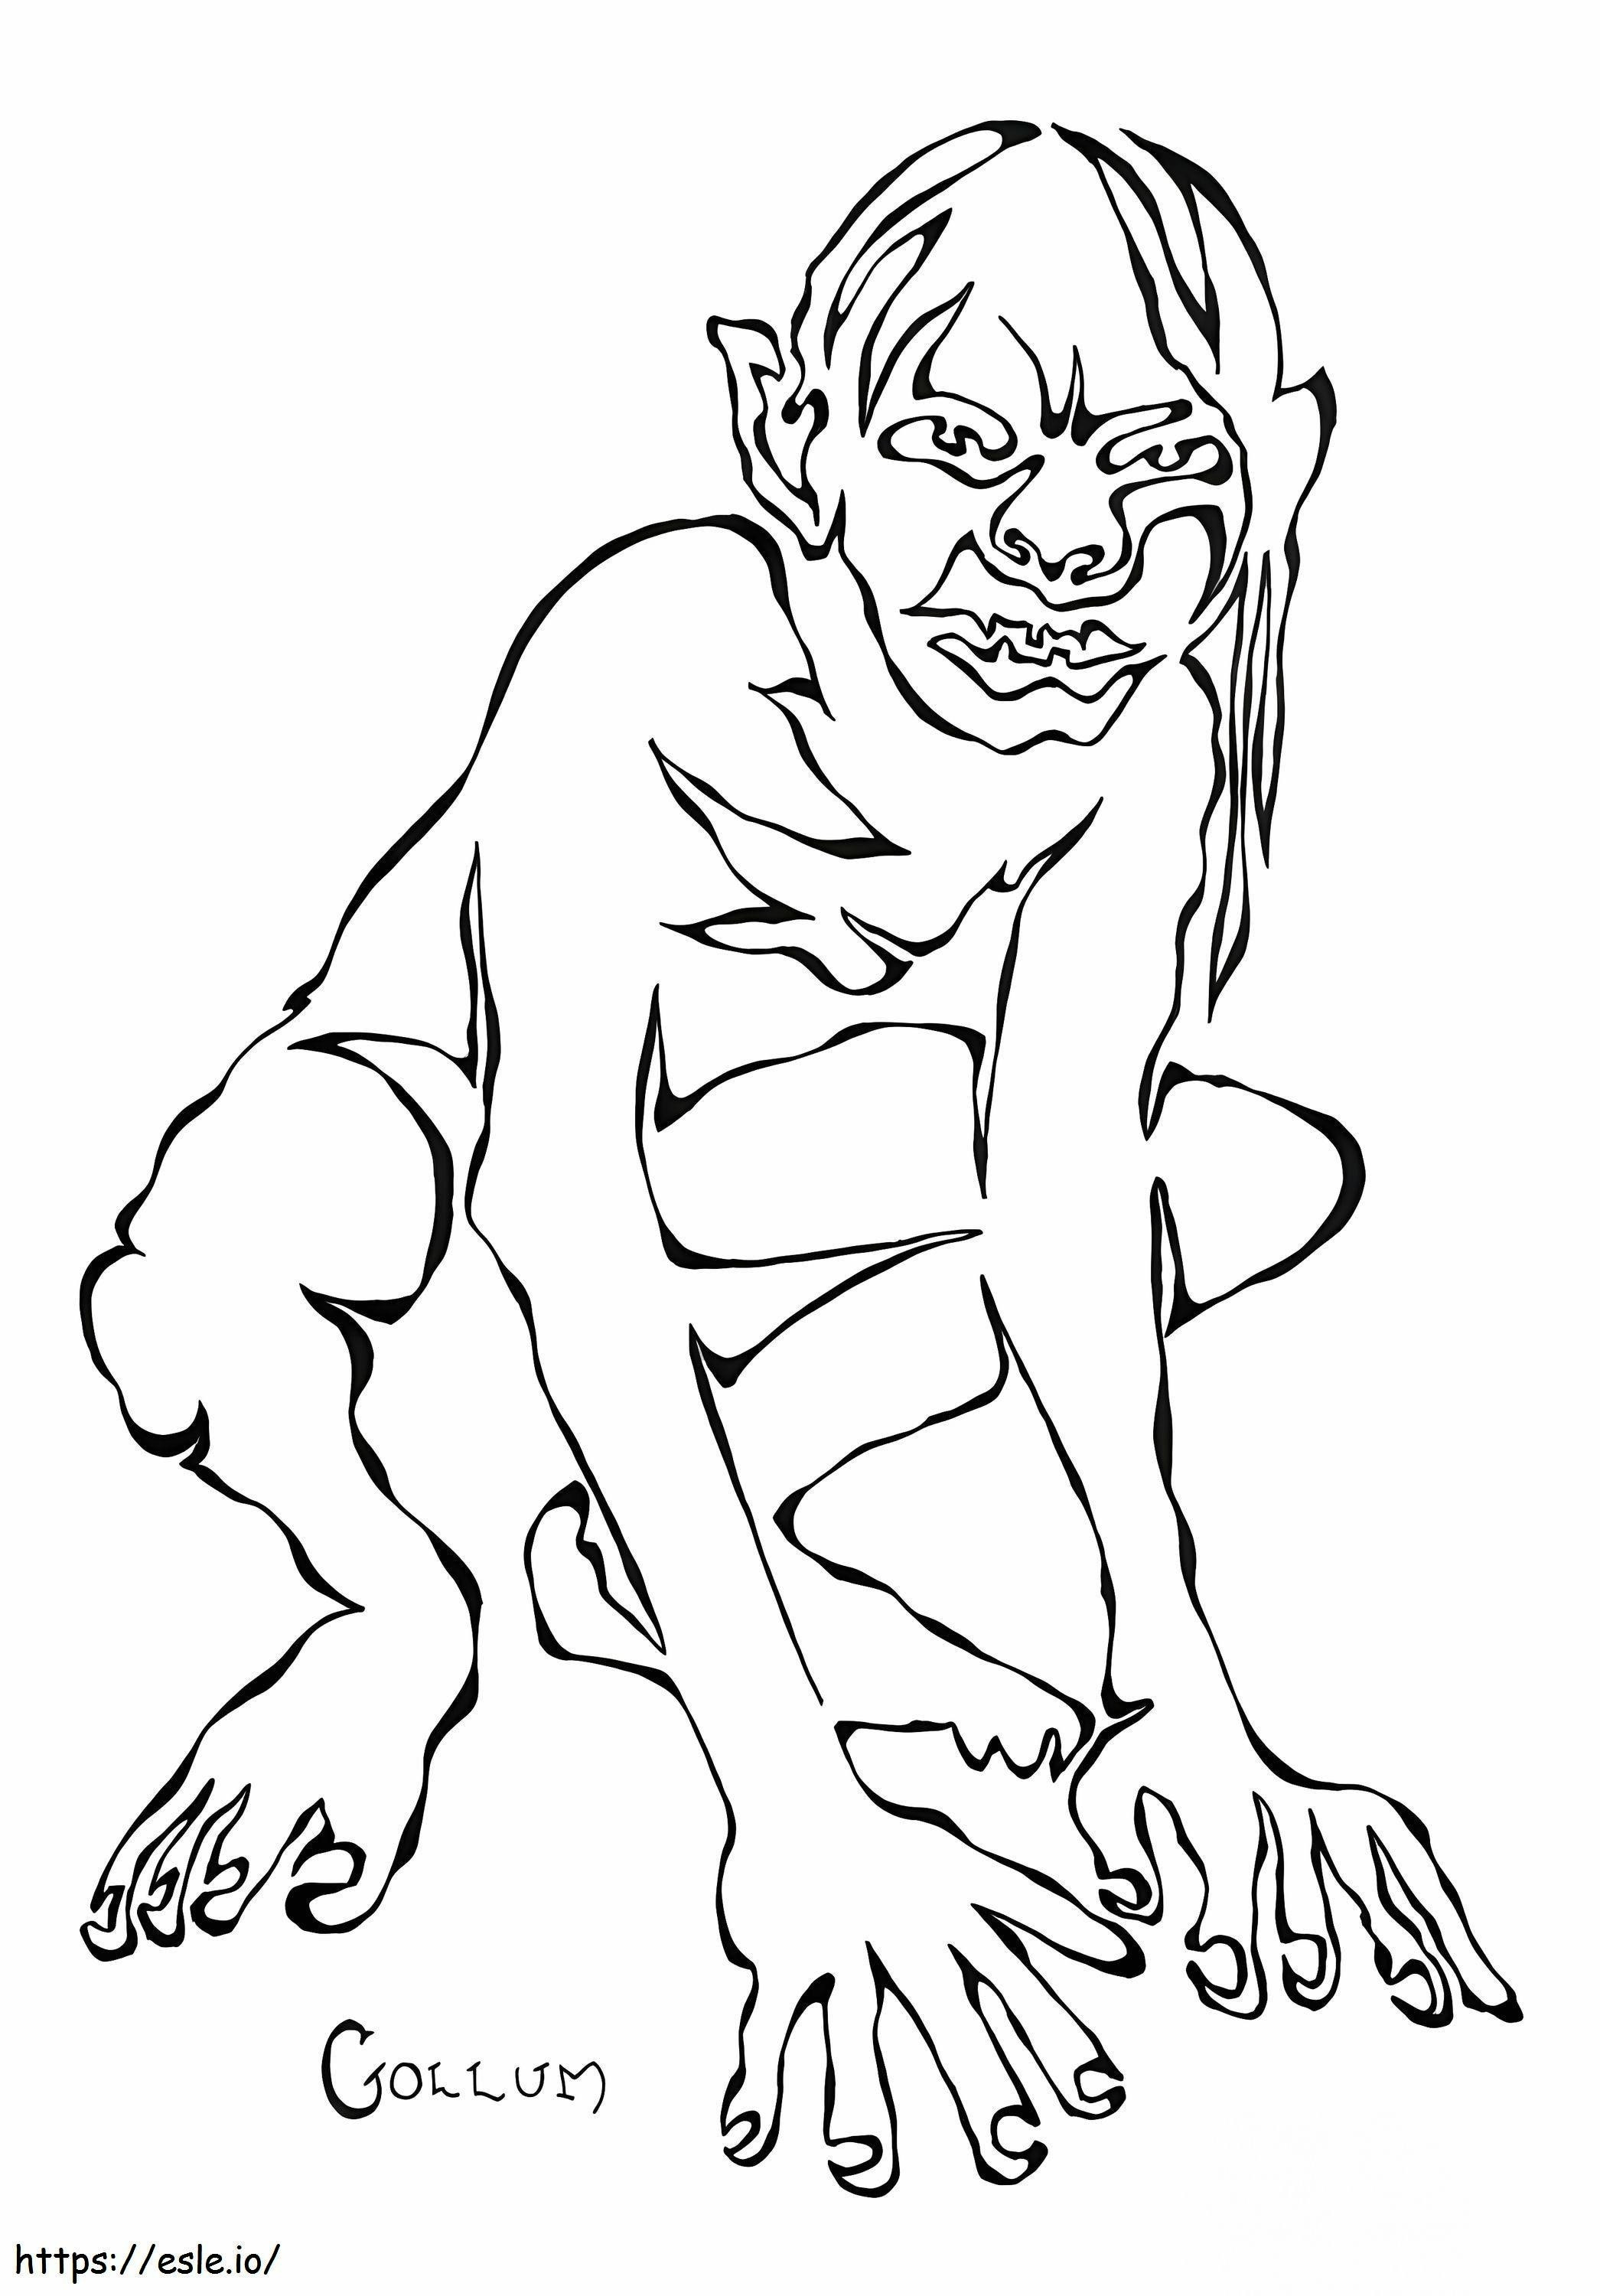 Evil Gollum coloring page